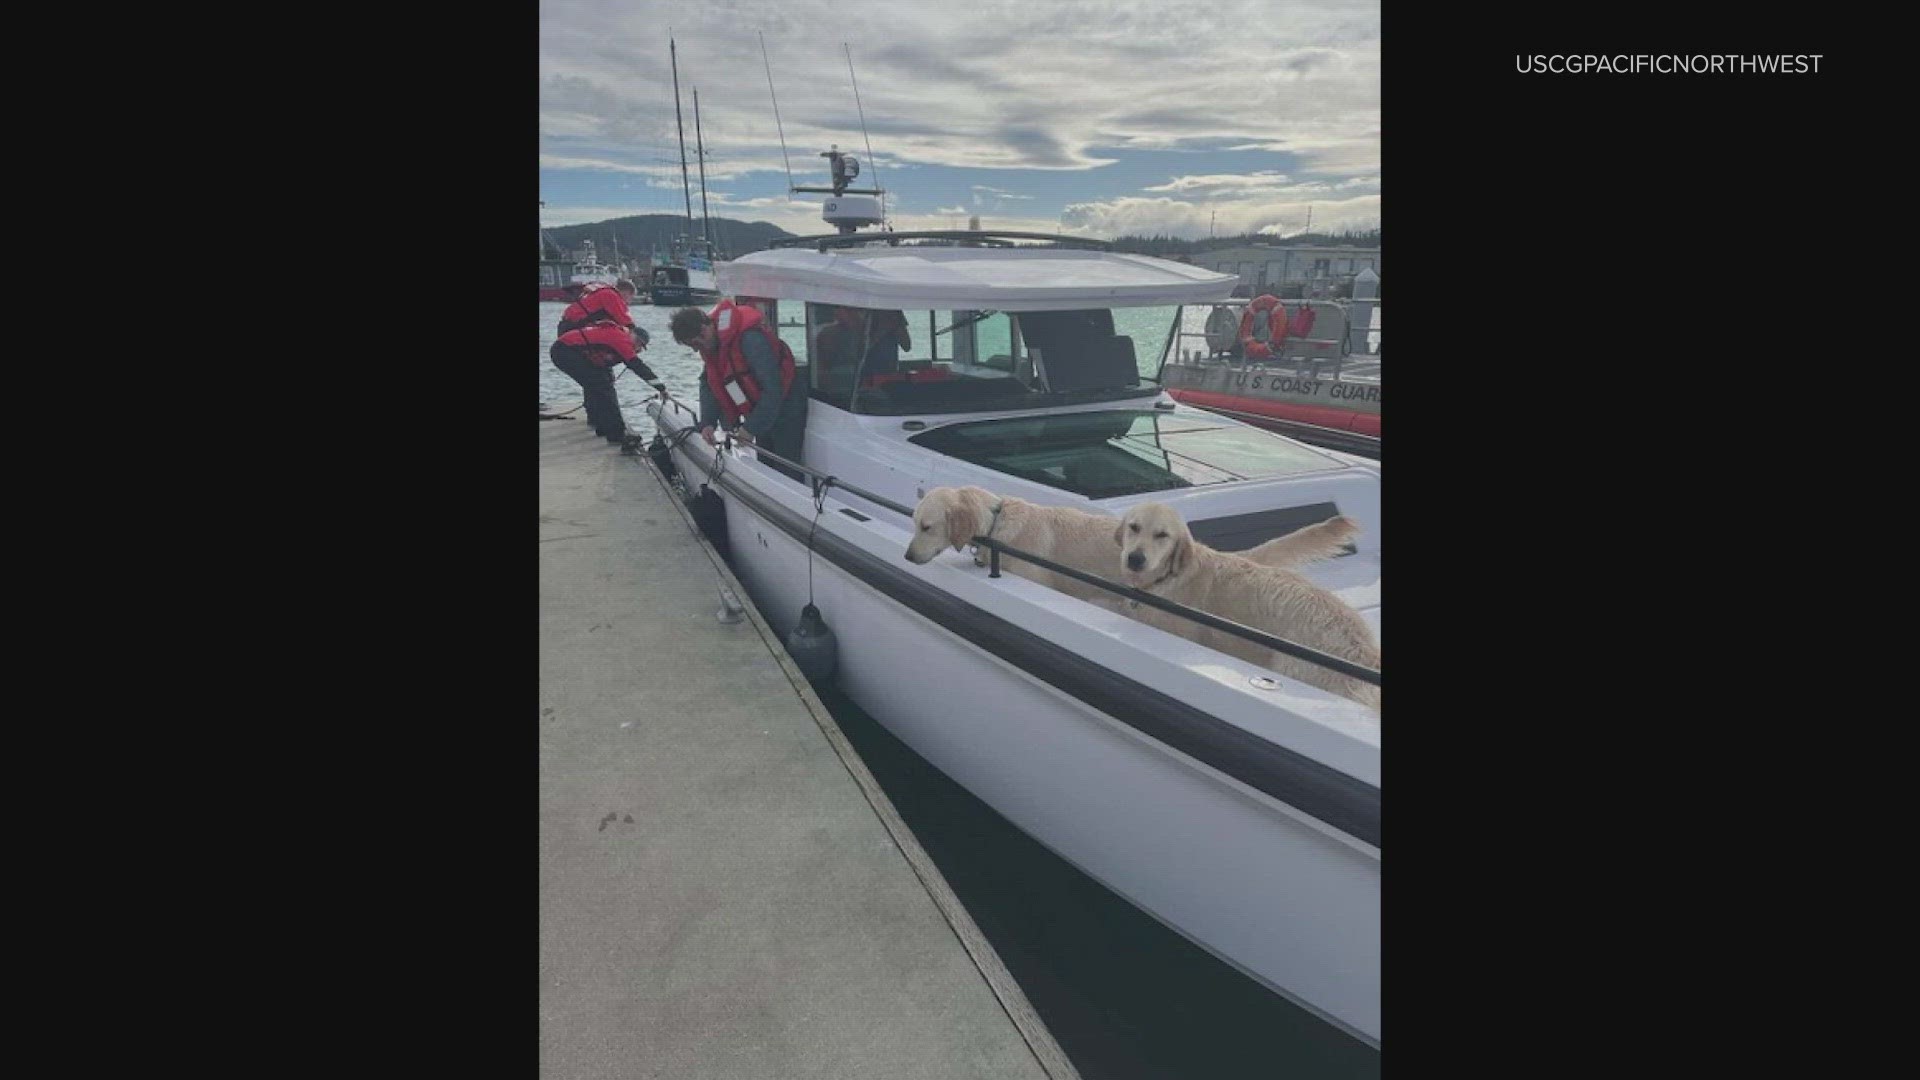 All six people and two dogs from the boat were recovered with no injuries reported.